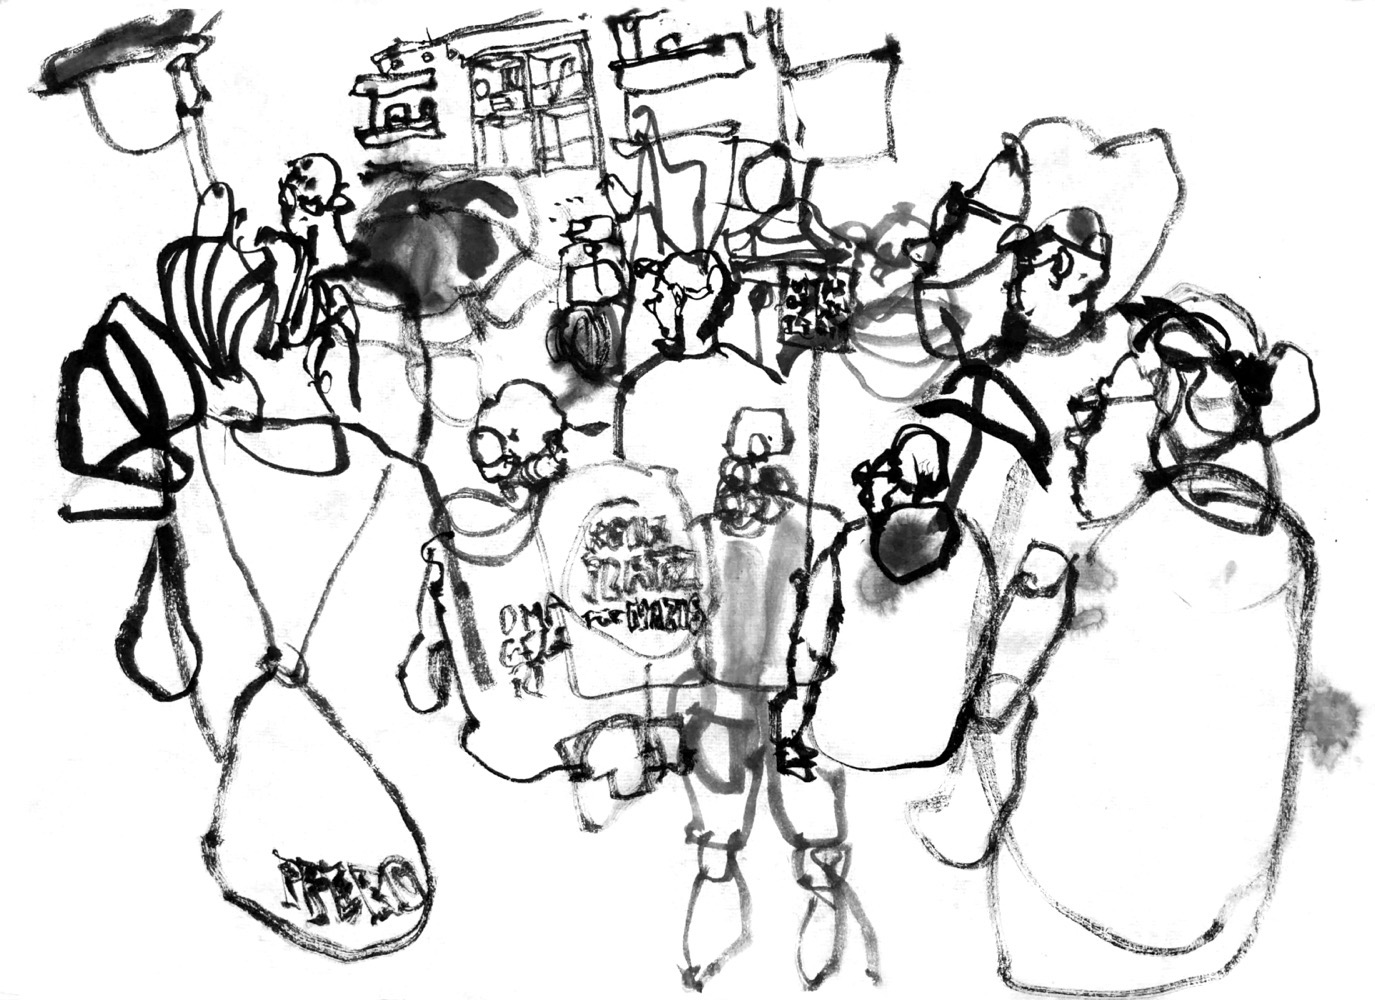 Scrawly ink drawing of a demonstration, walking, people seen from behind. One sign says ‘kein Platz für Nazis’, some modernist housing in the background.